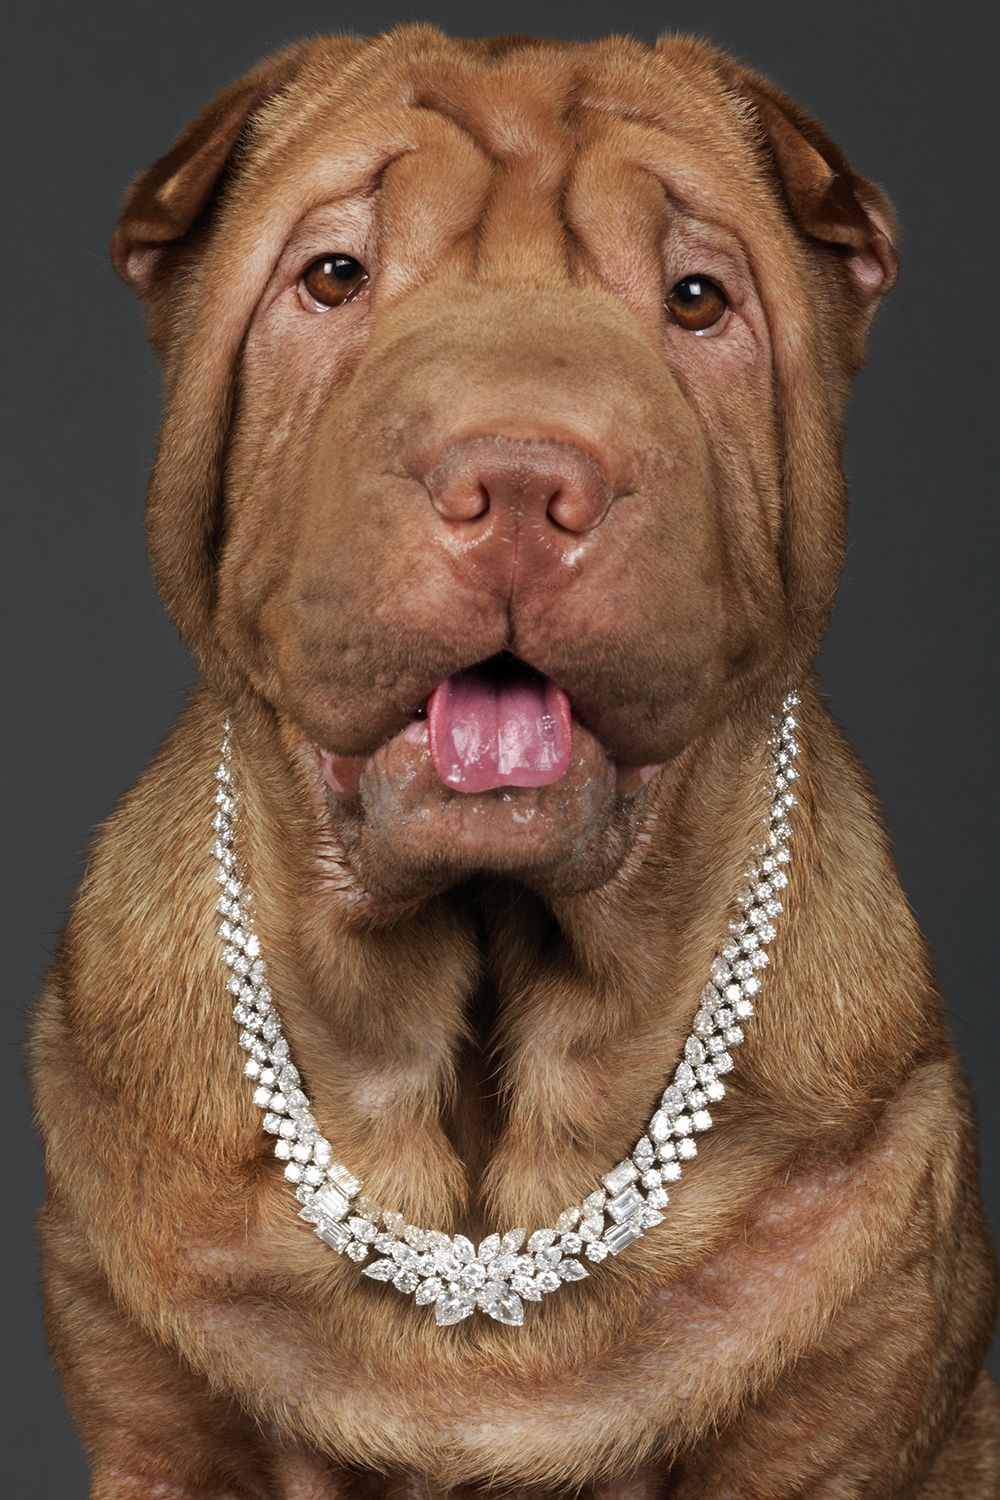 Men\u2019s jewelry A new collection with the geometric dog A tie tack with a Shar Pei dog